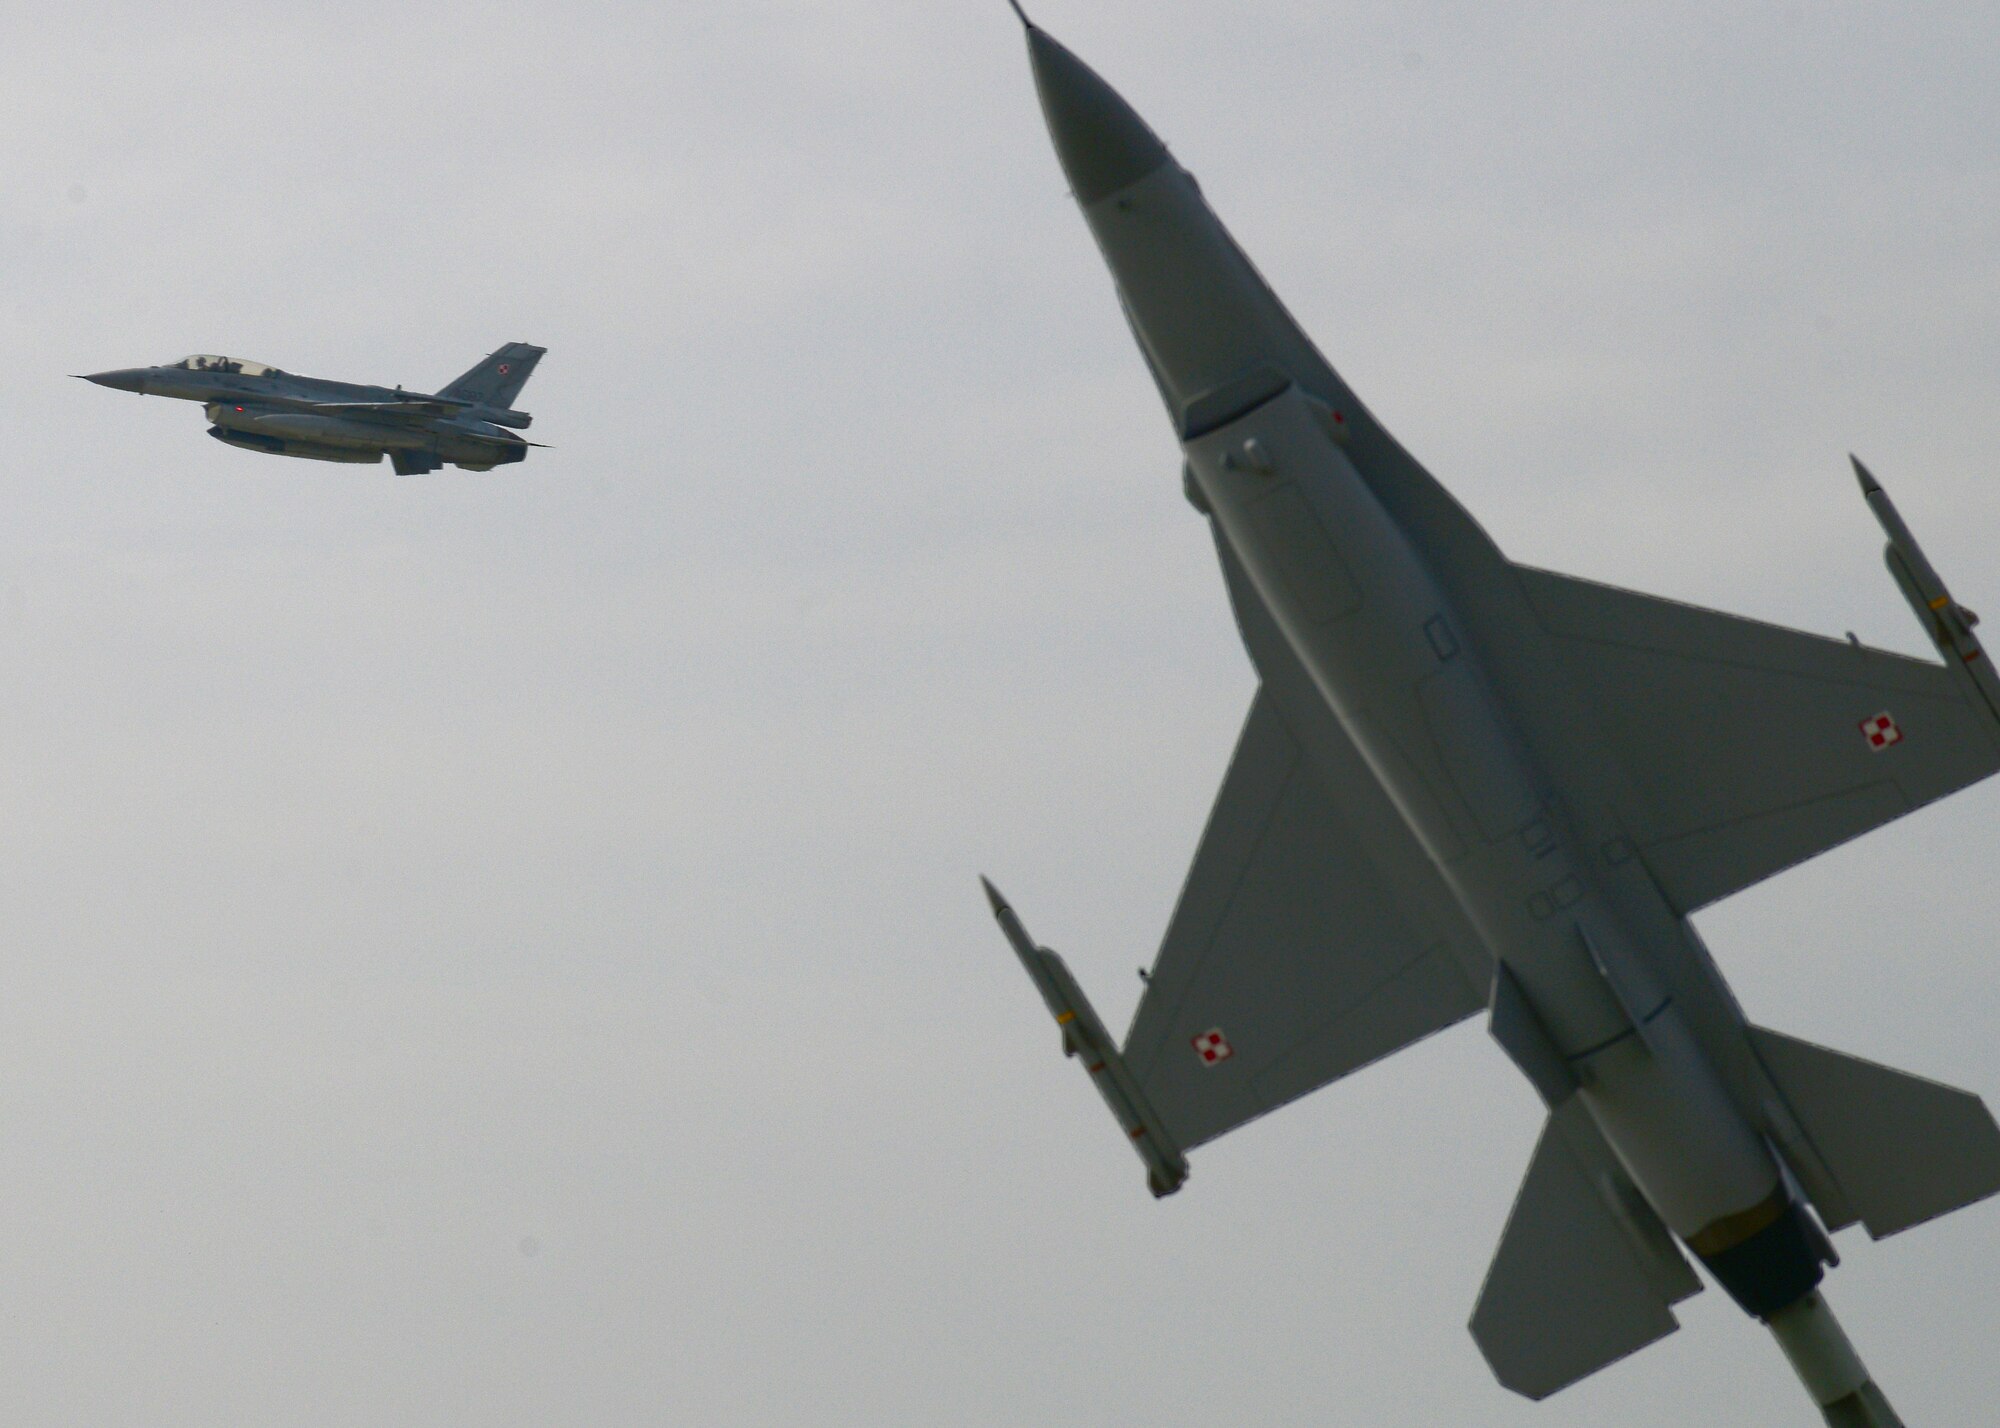 A Polish F-16 Fighting Falcon fighter aircraft passes a static display of an F-16 after takeoff, April 1, 2014, at Łask Air Base, Poland. The Polish armed forces and approximately 200 U.S. personnel have built partnership capacity together here since March 13, to increase cooperation and strengthen operational understanding of the other’s military processes, strengthening interoperability with a key NATO ally. (U.S. Air Force photo/Airman 1st Class Ryan Conroy/Released)